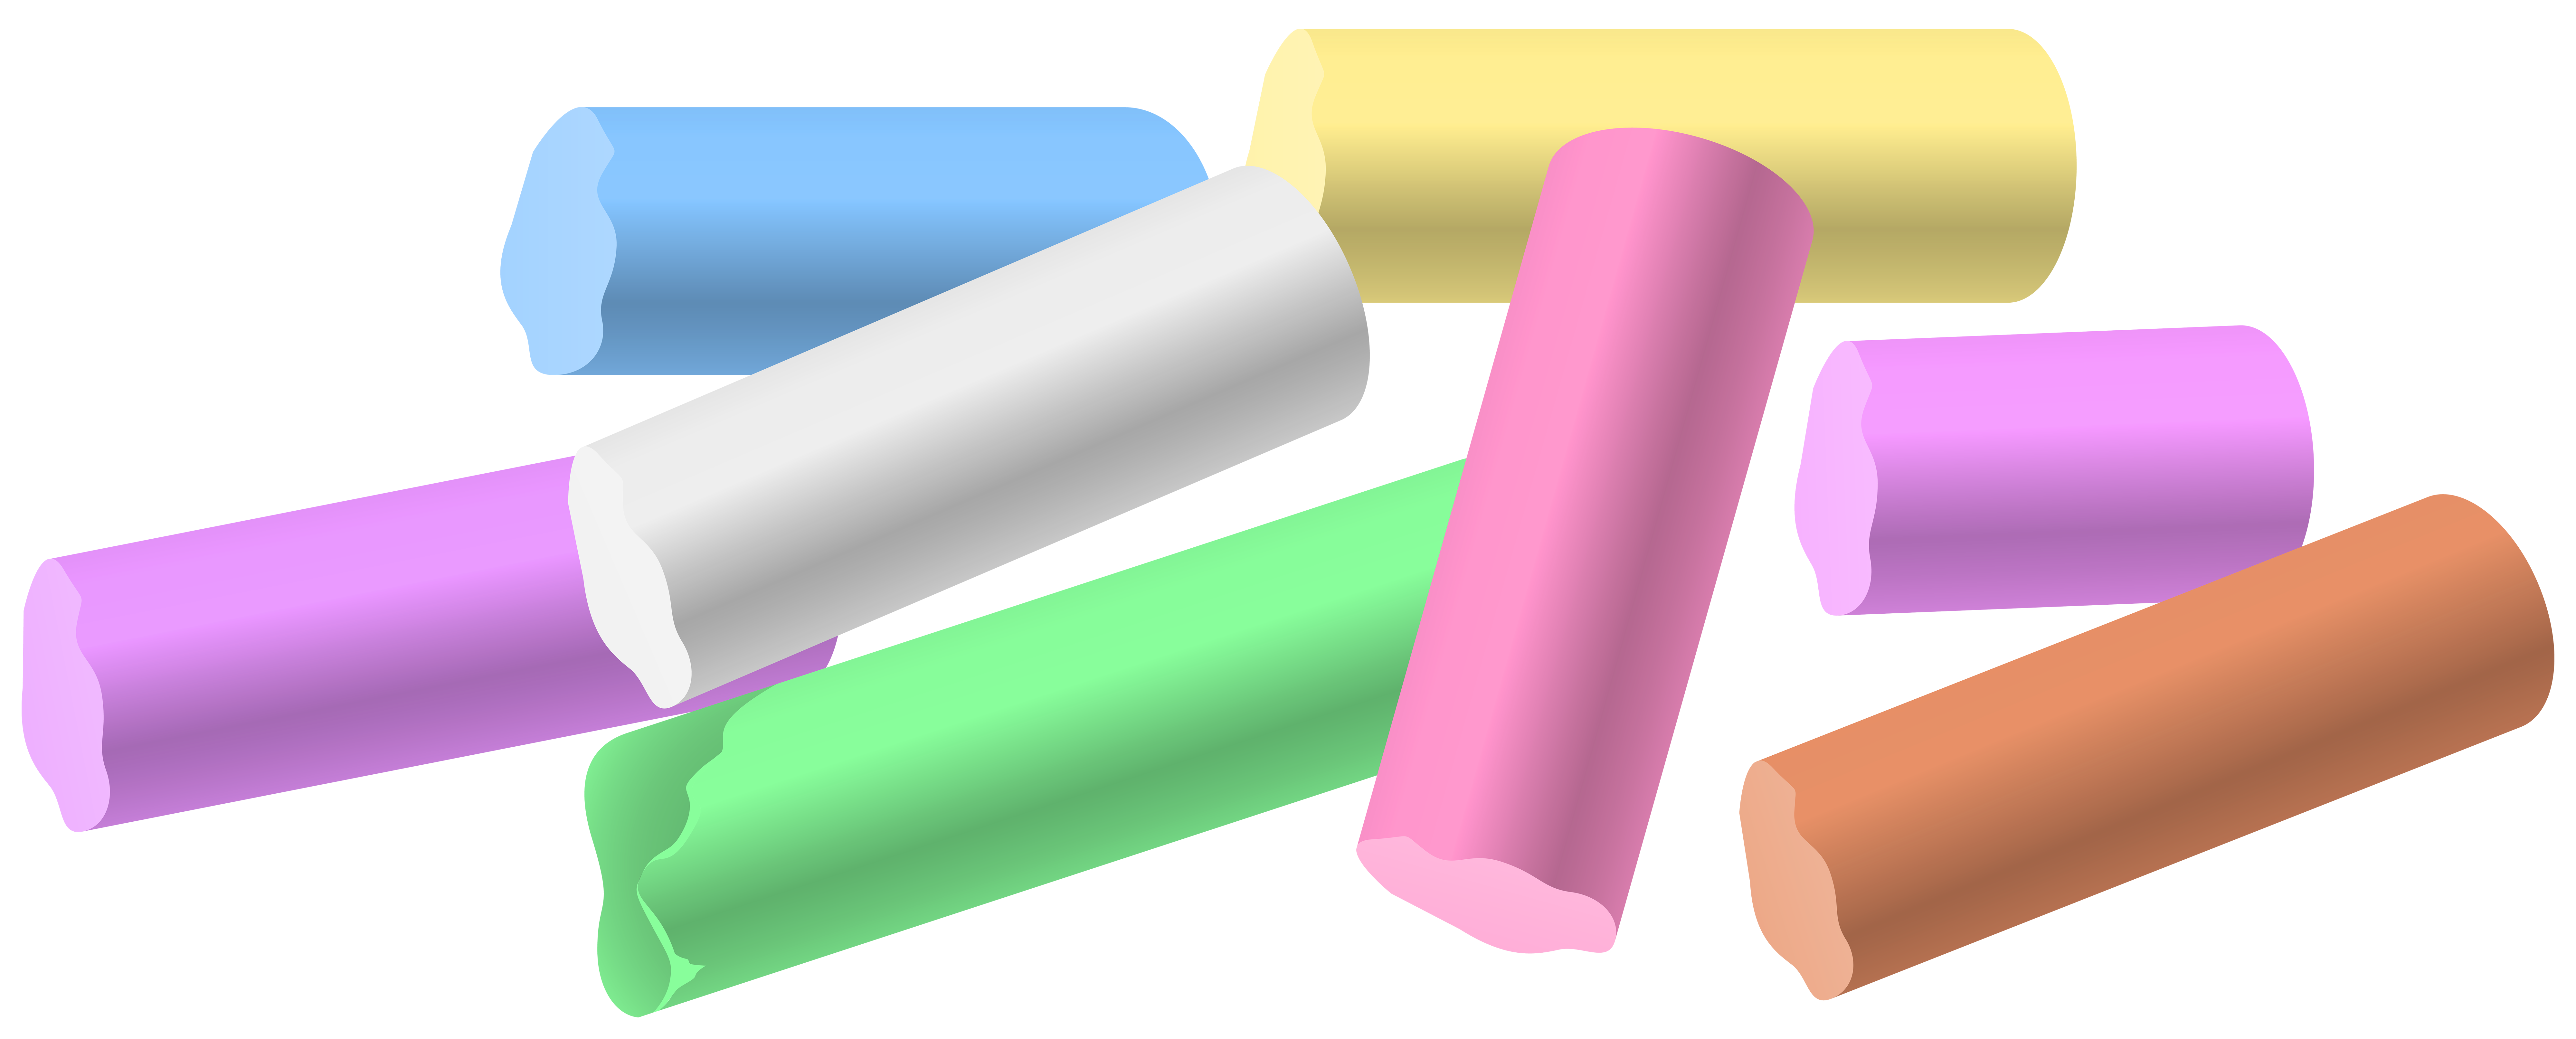 Weight clipart drawn. Chalk pieces png clip